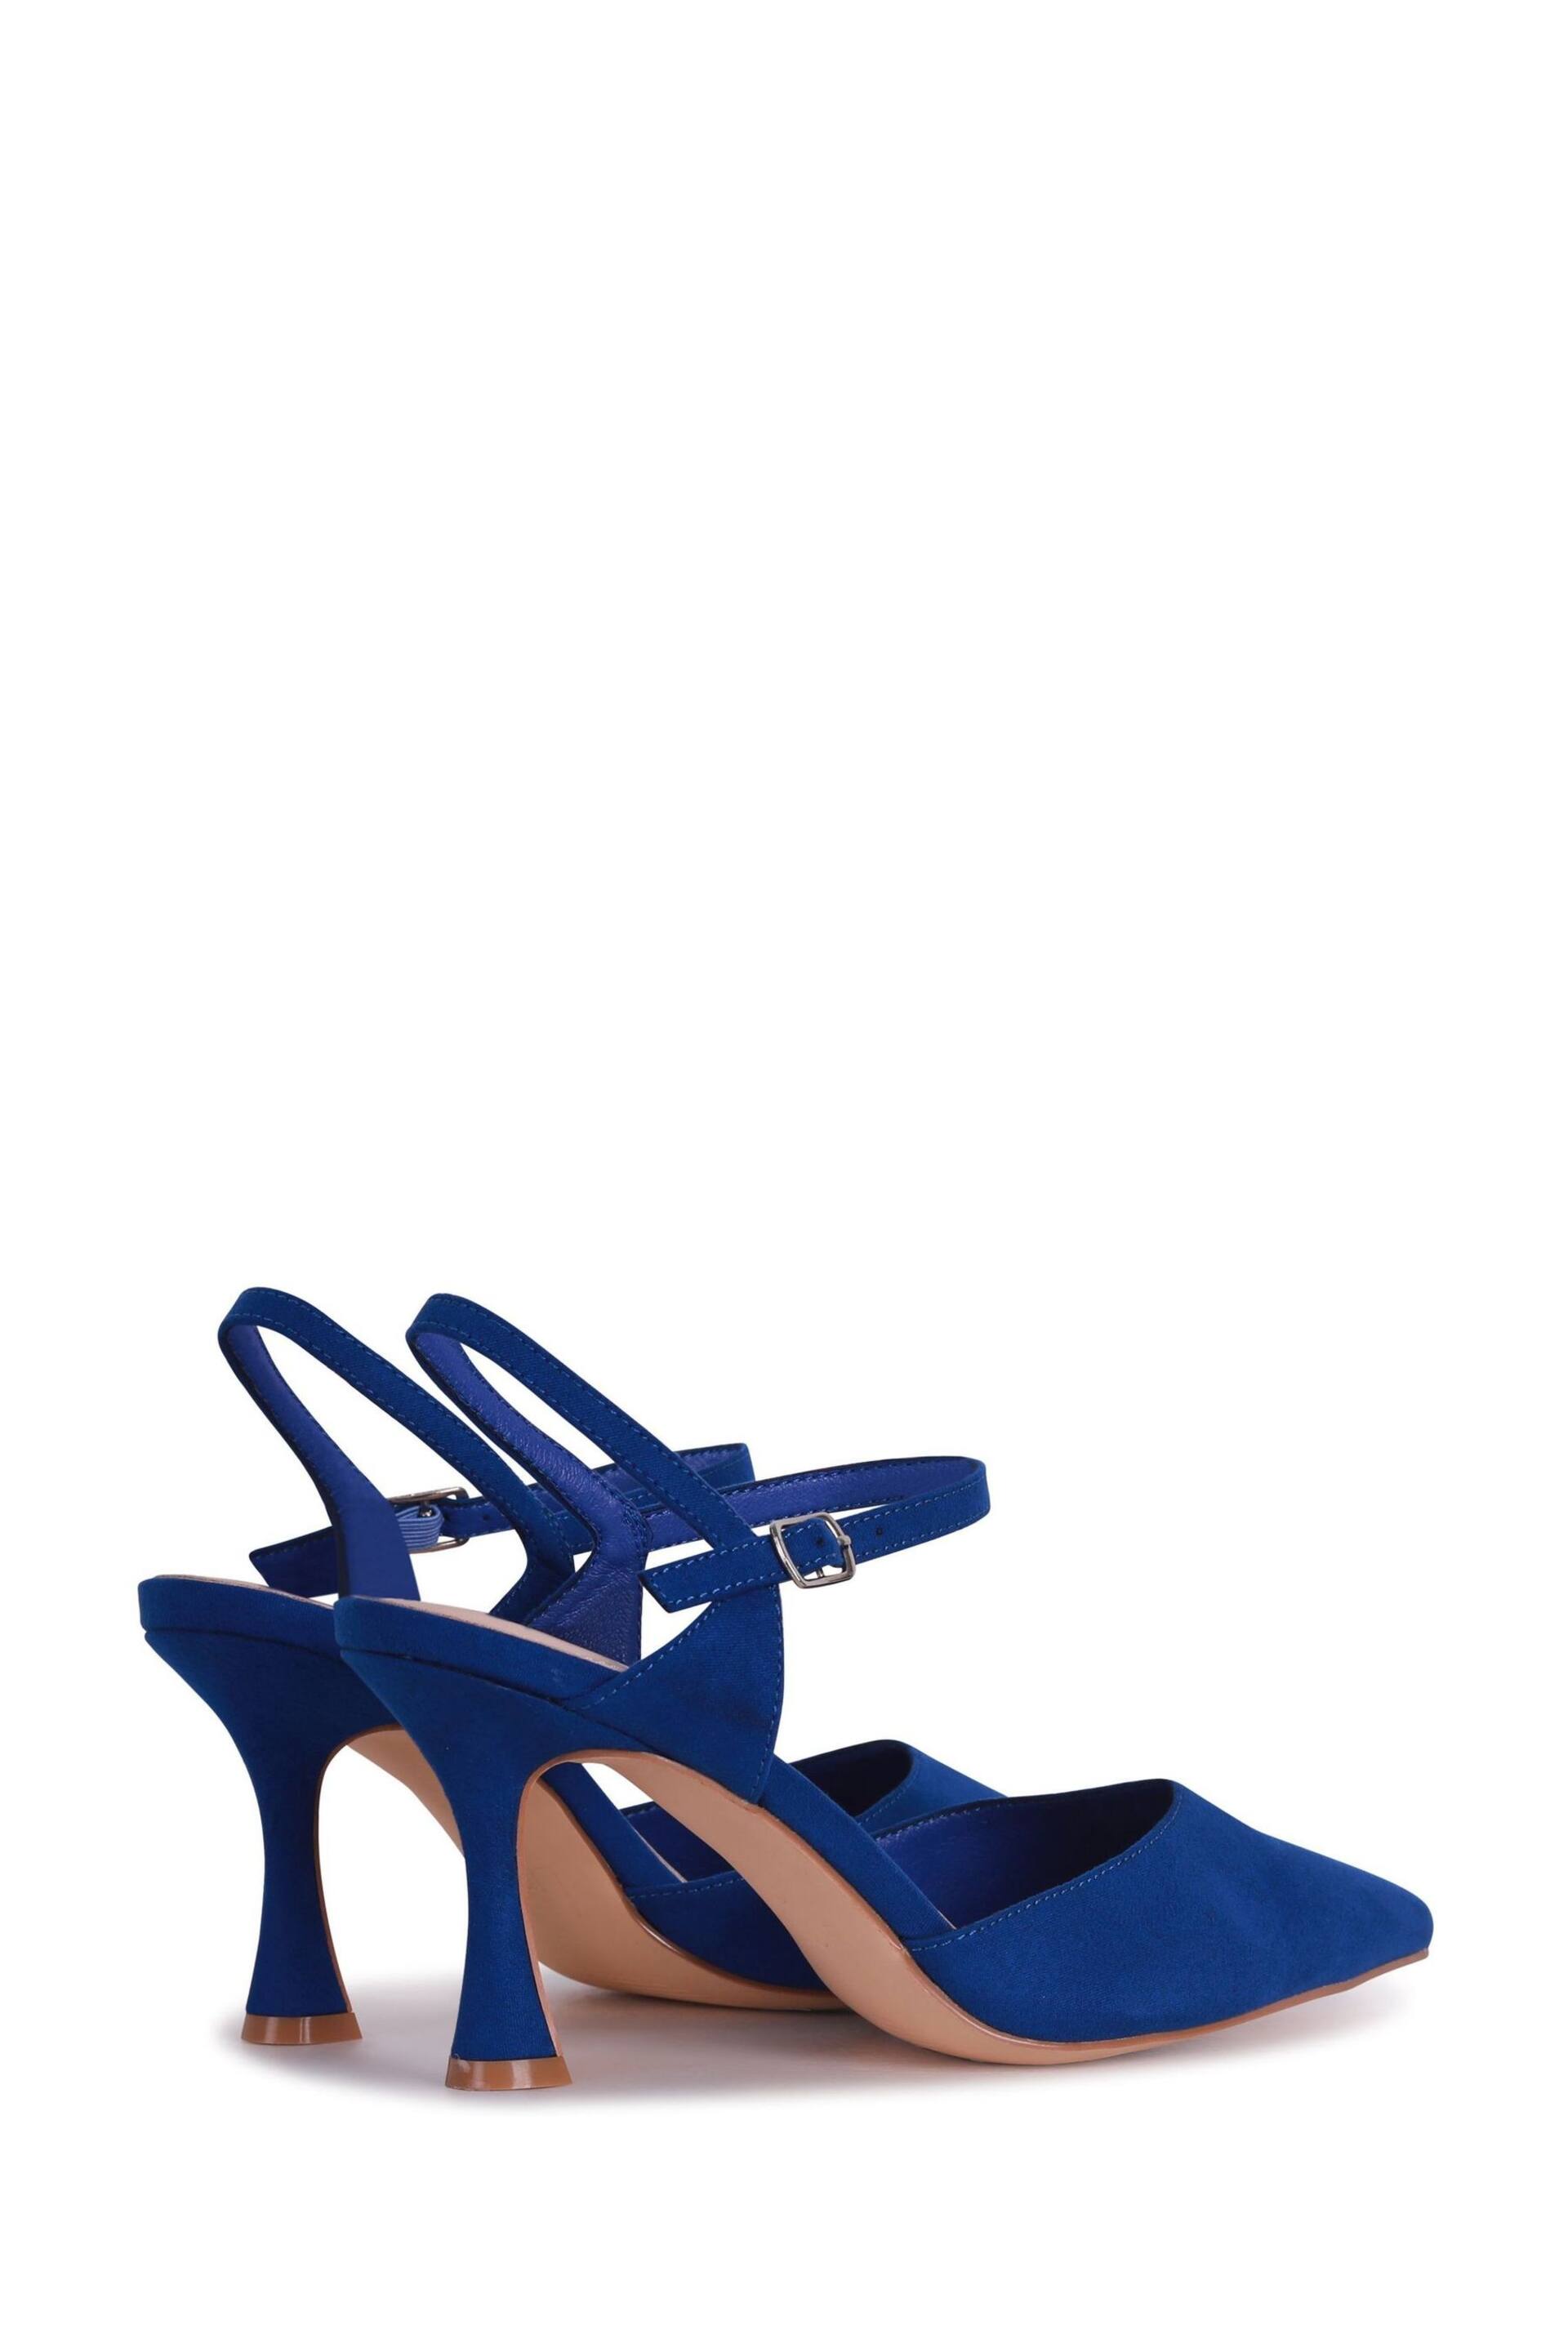 Linzi Blue Duet Wide Fit Openback Heels With Ankle Straps - Image 4 of 4